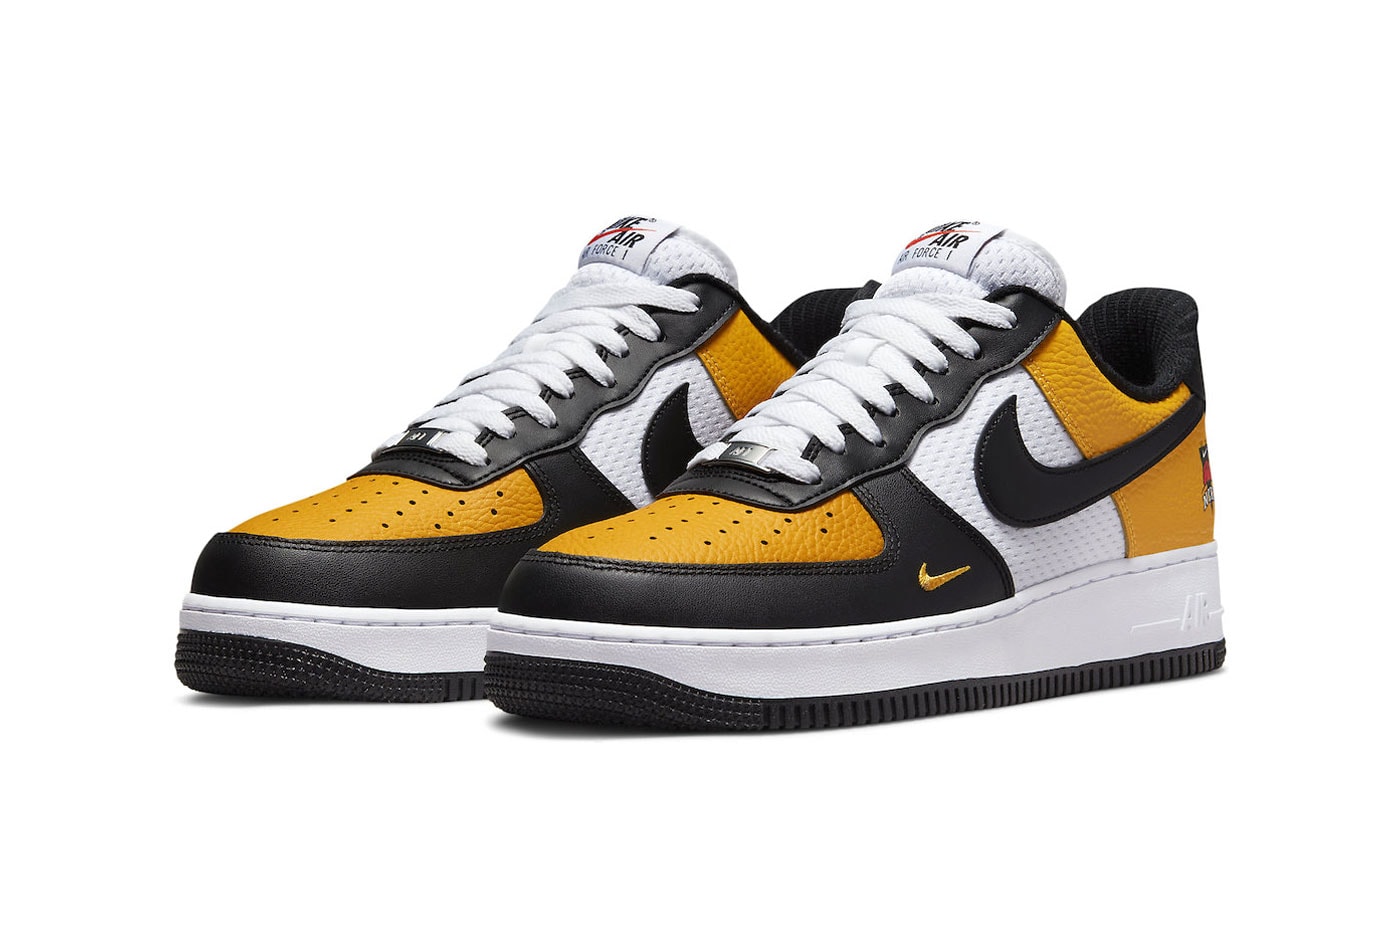 Nike Air Force 1 Low GS Jersey Mesh DQ7779-700